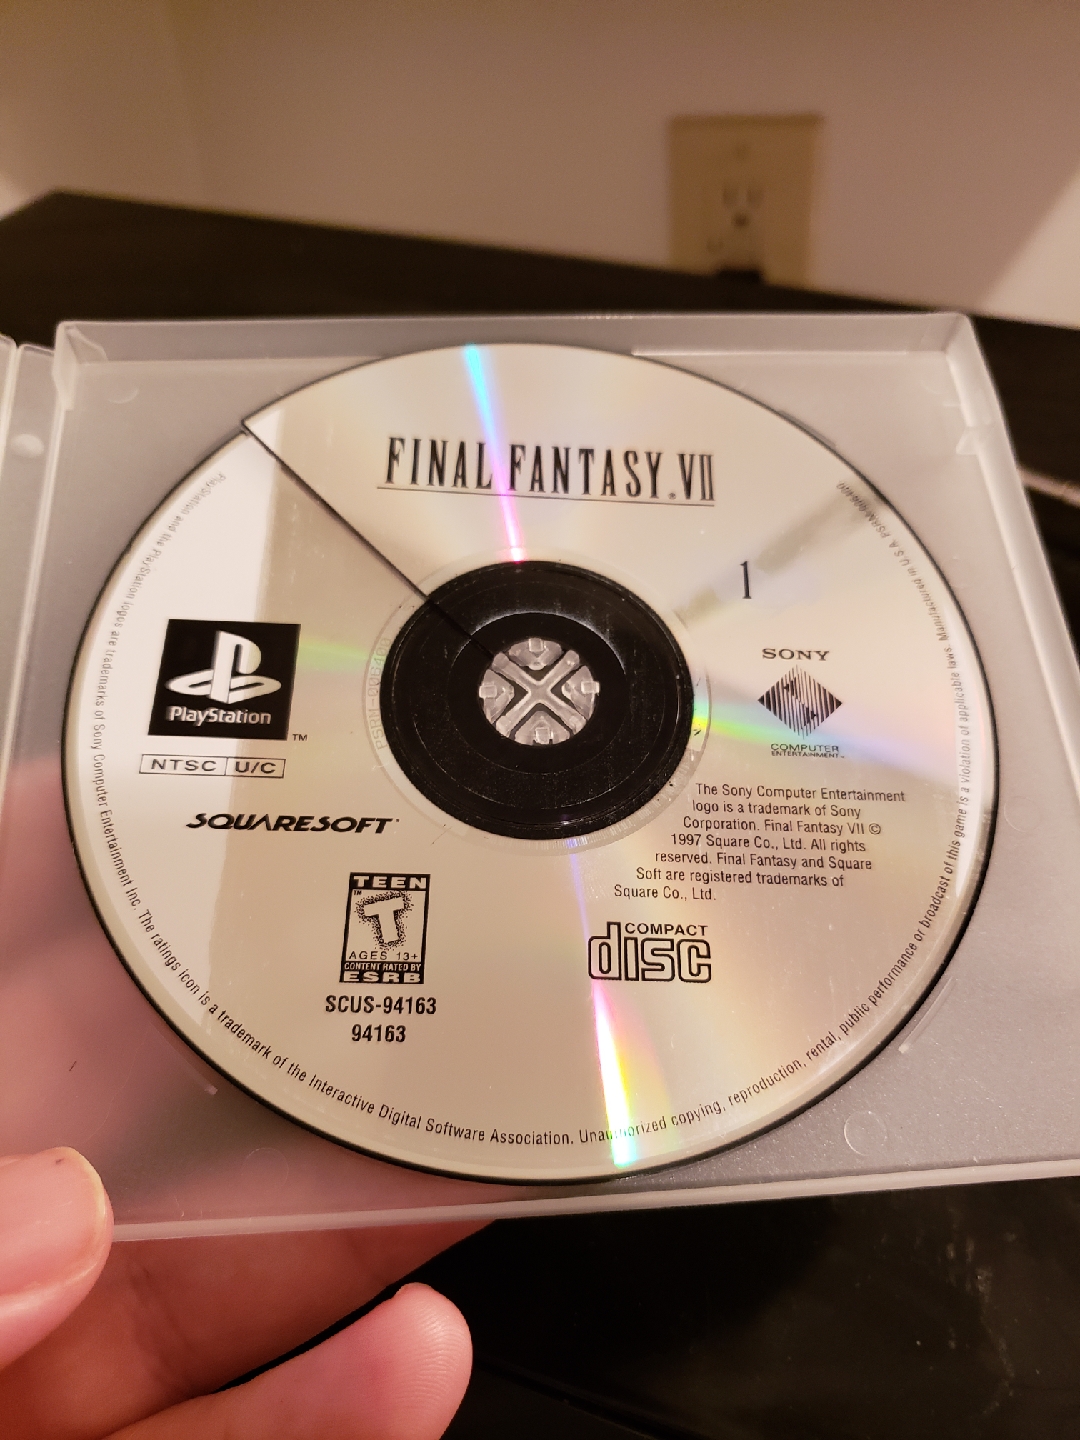 FF7cracked